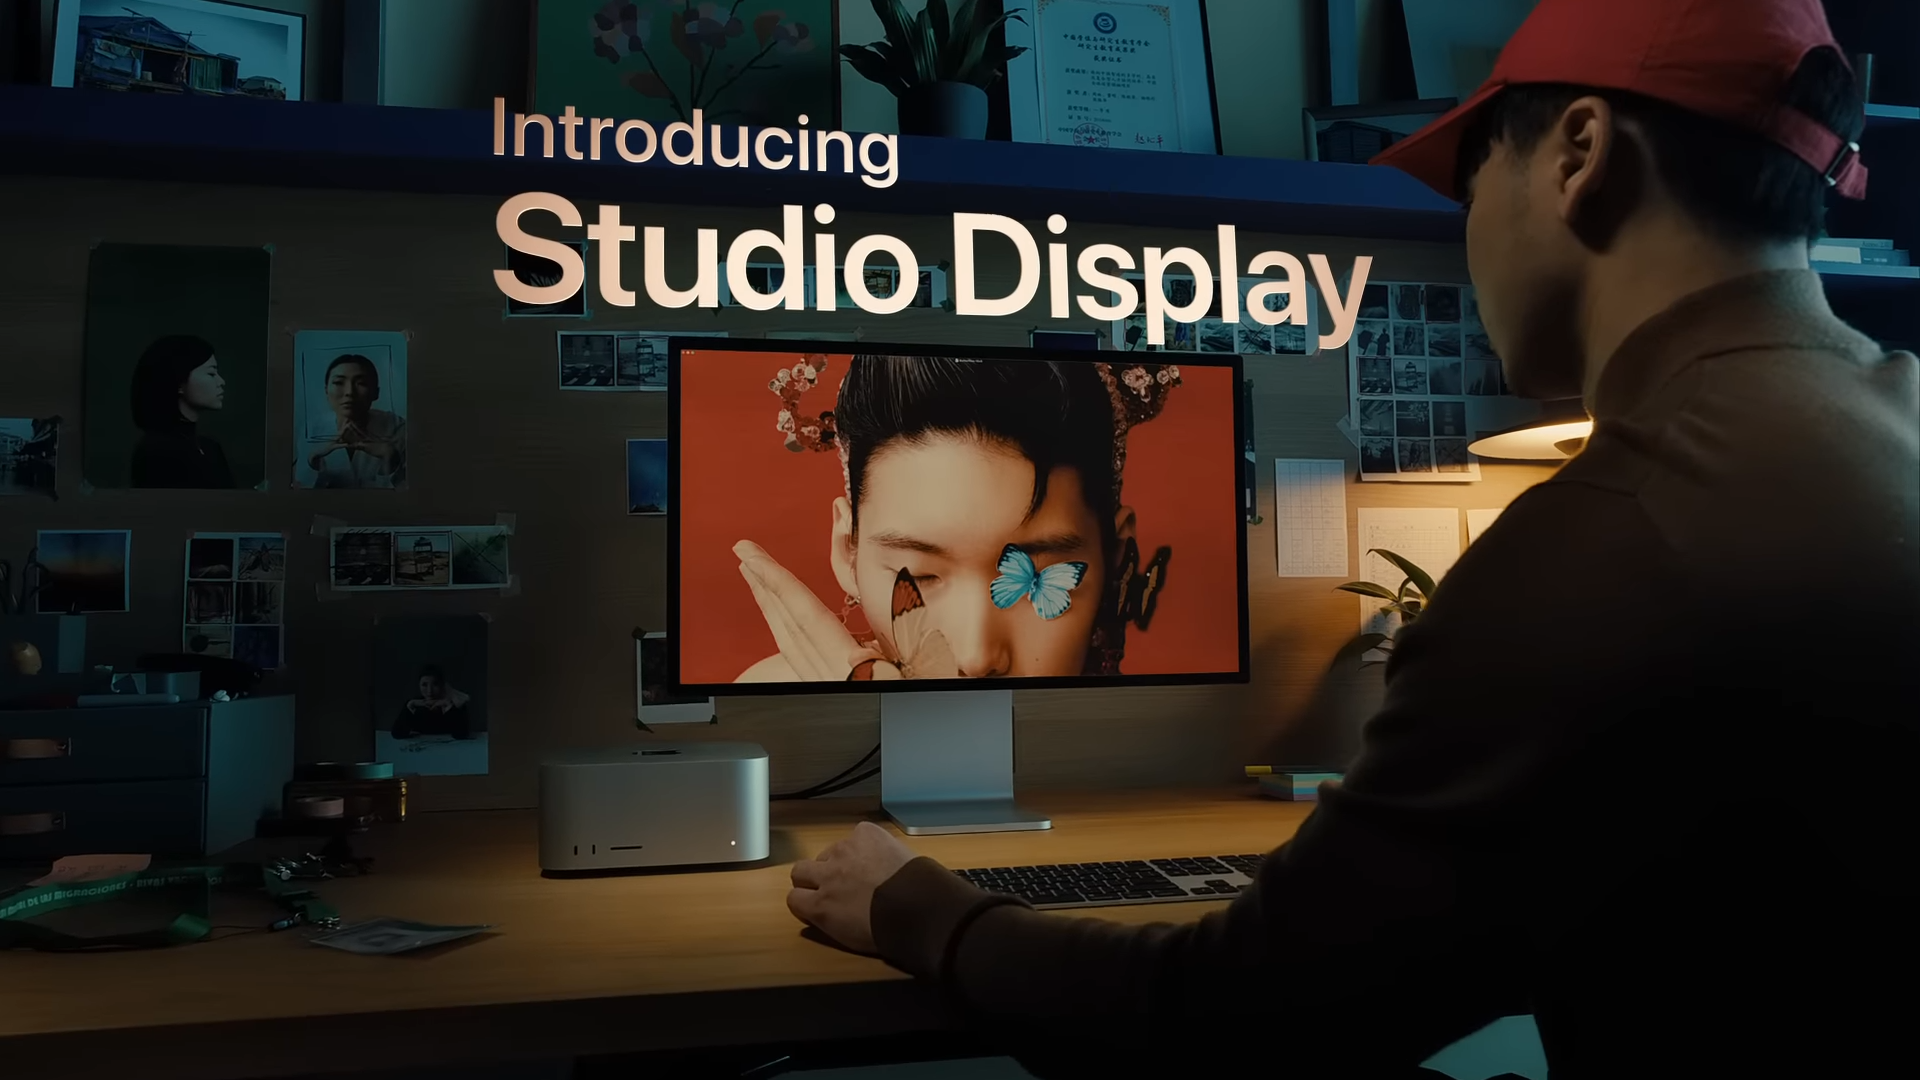 Apple Studio Display being introduced with person using it